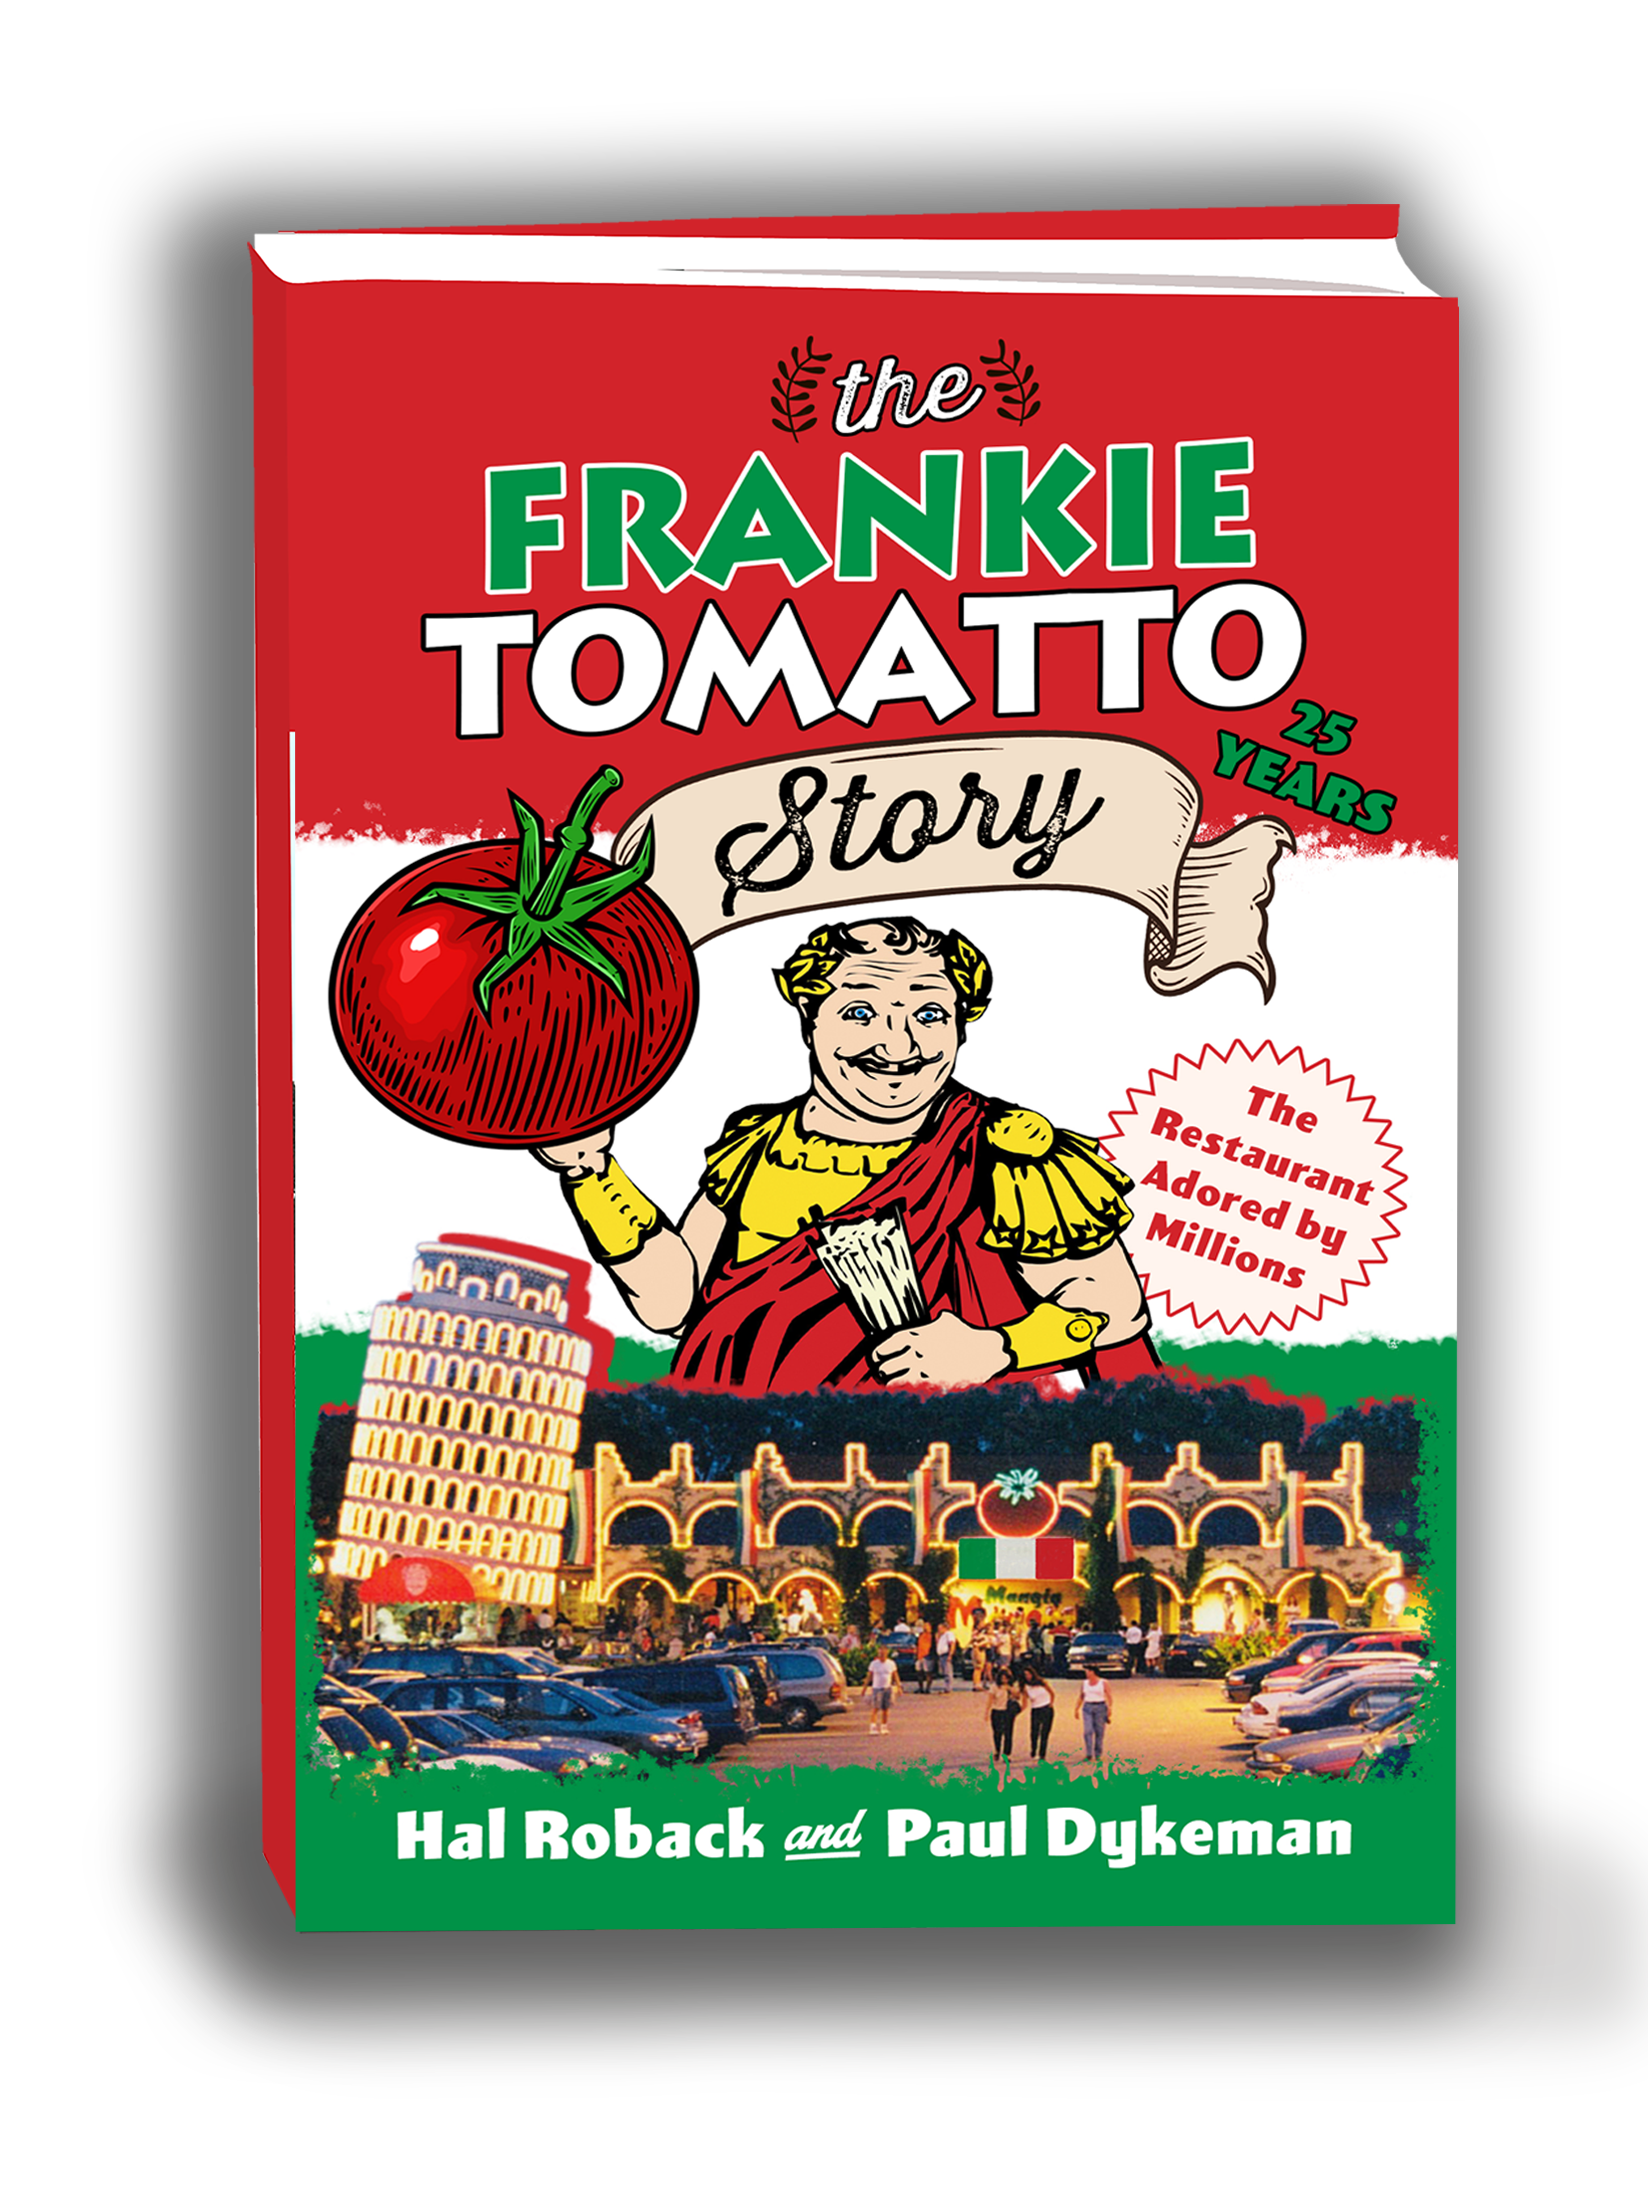 The Frankie Tomatto Story - Cover